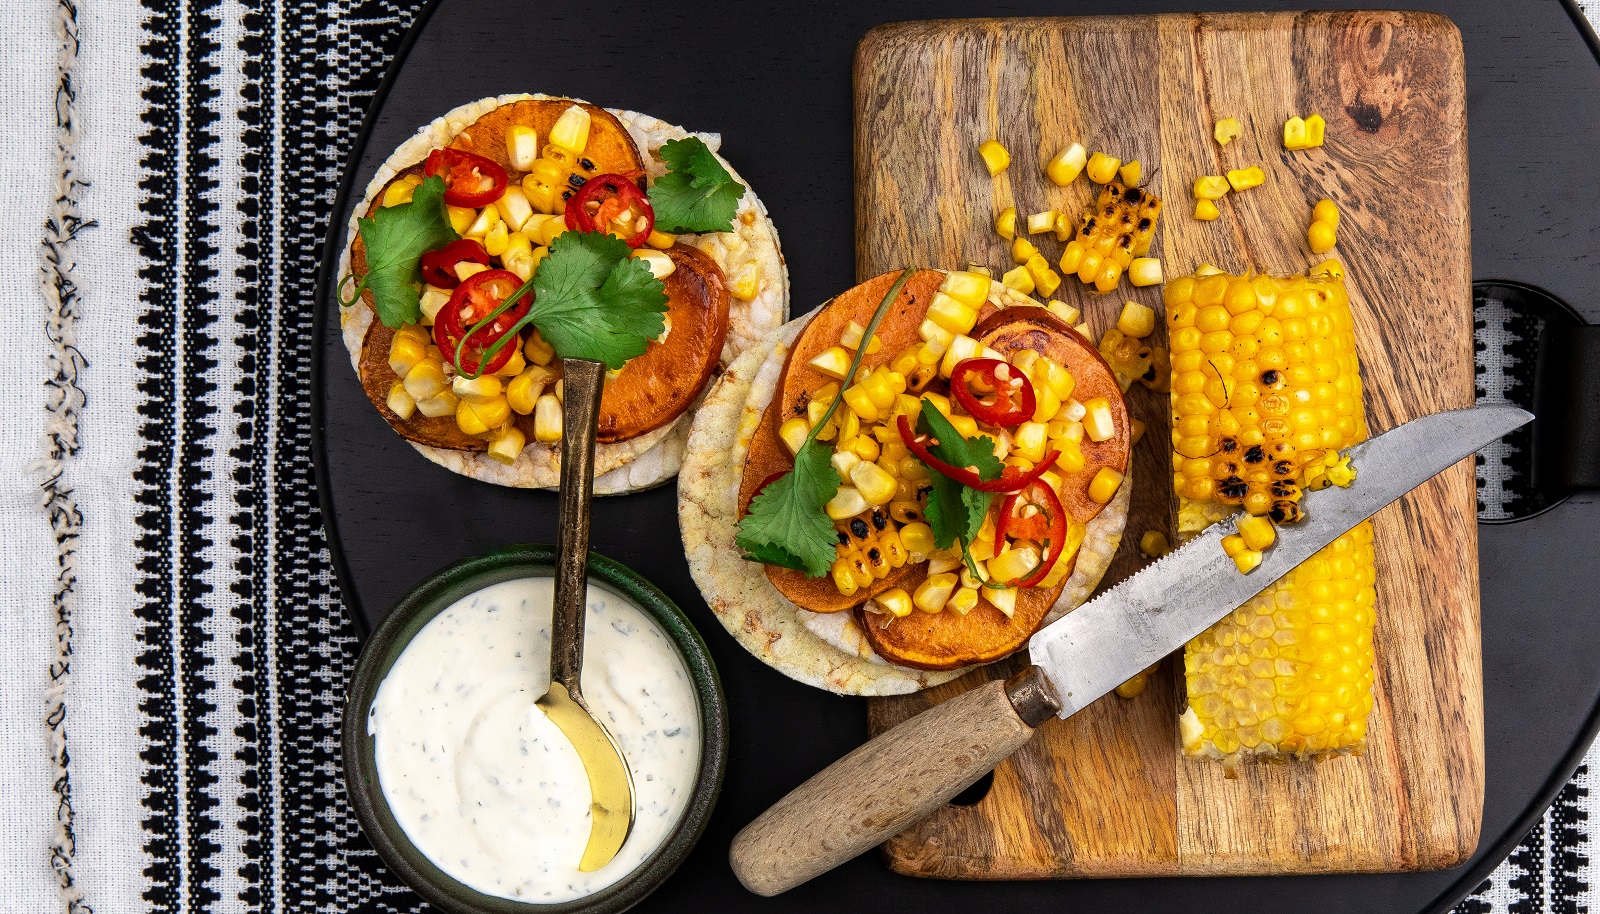 Grilled sweet potato, corn, coriander & ranch dressing on Corn Thins slices